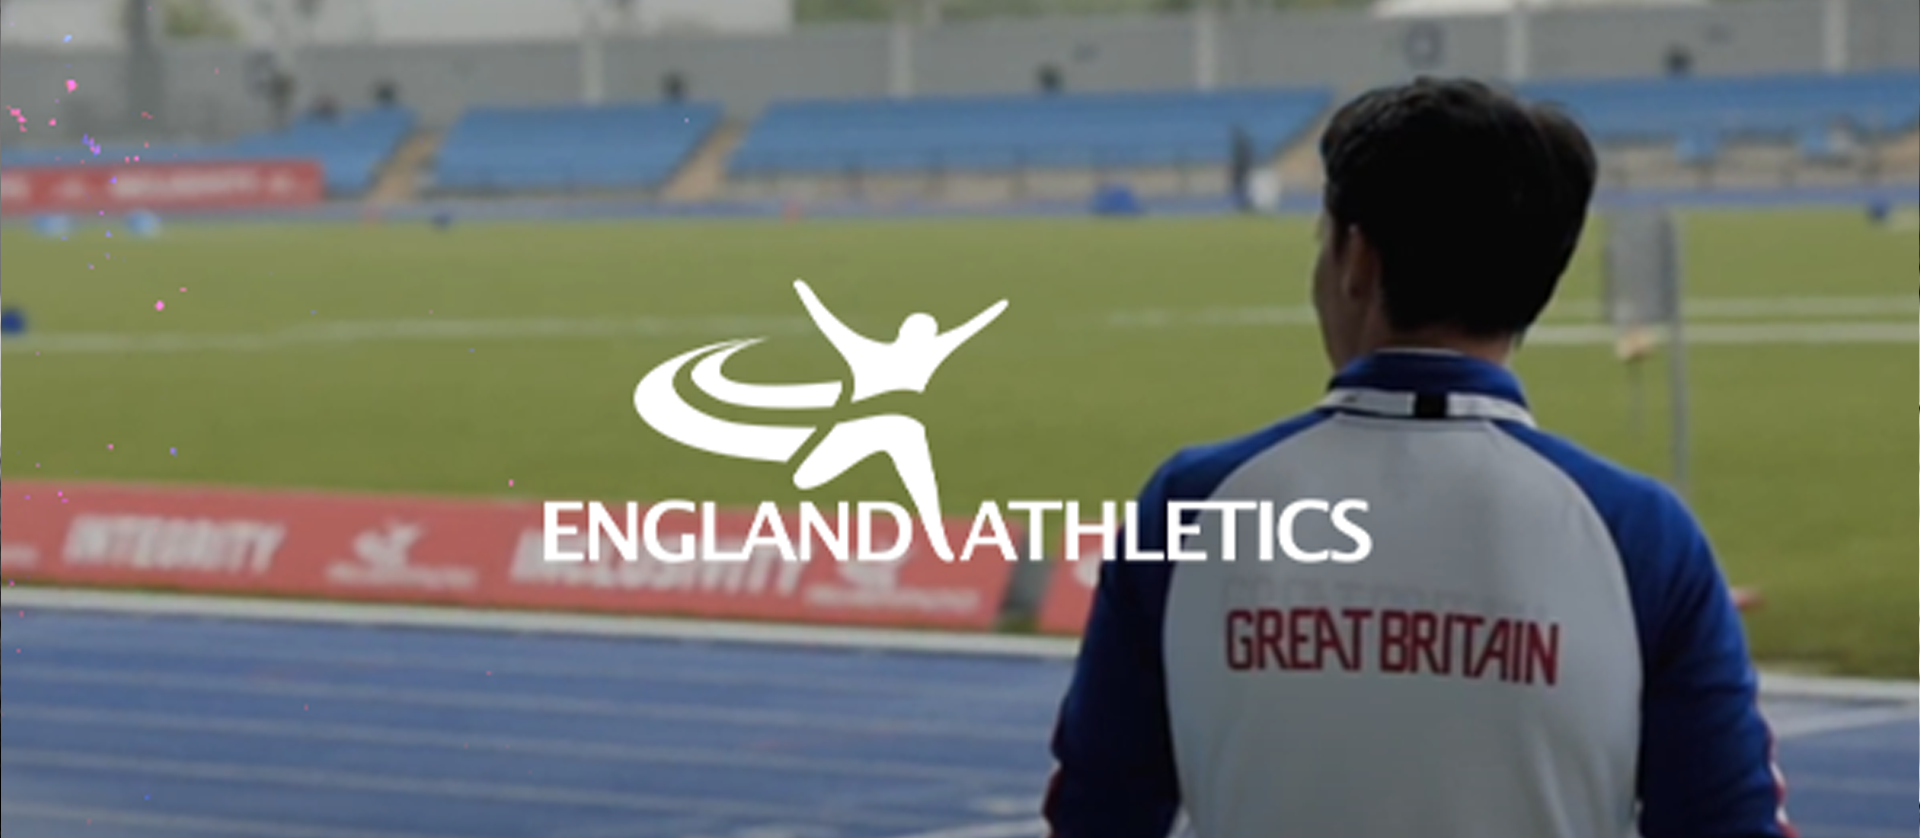 How England Athletics engaged 94% of their workforce with wellbeing